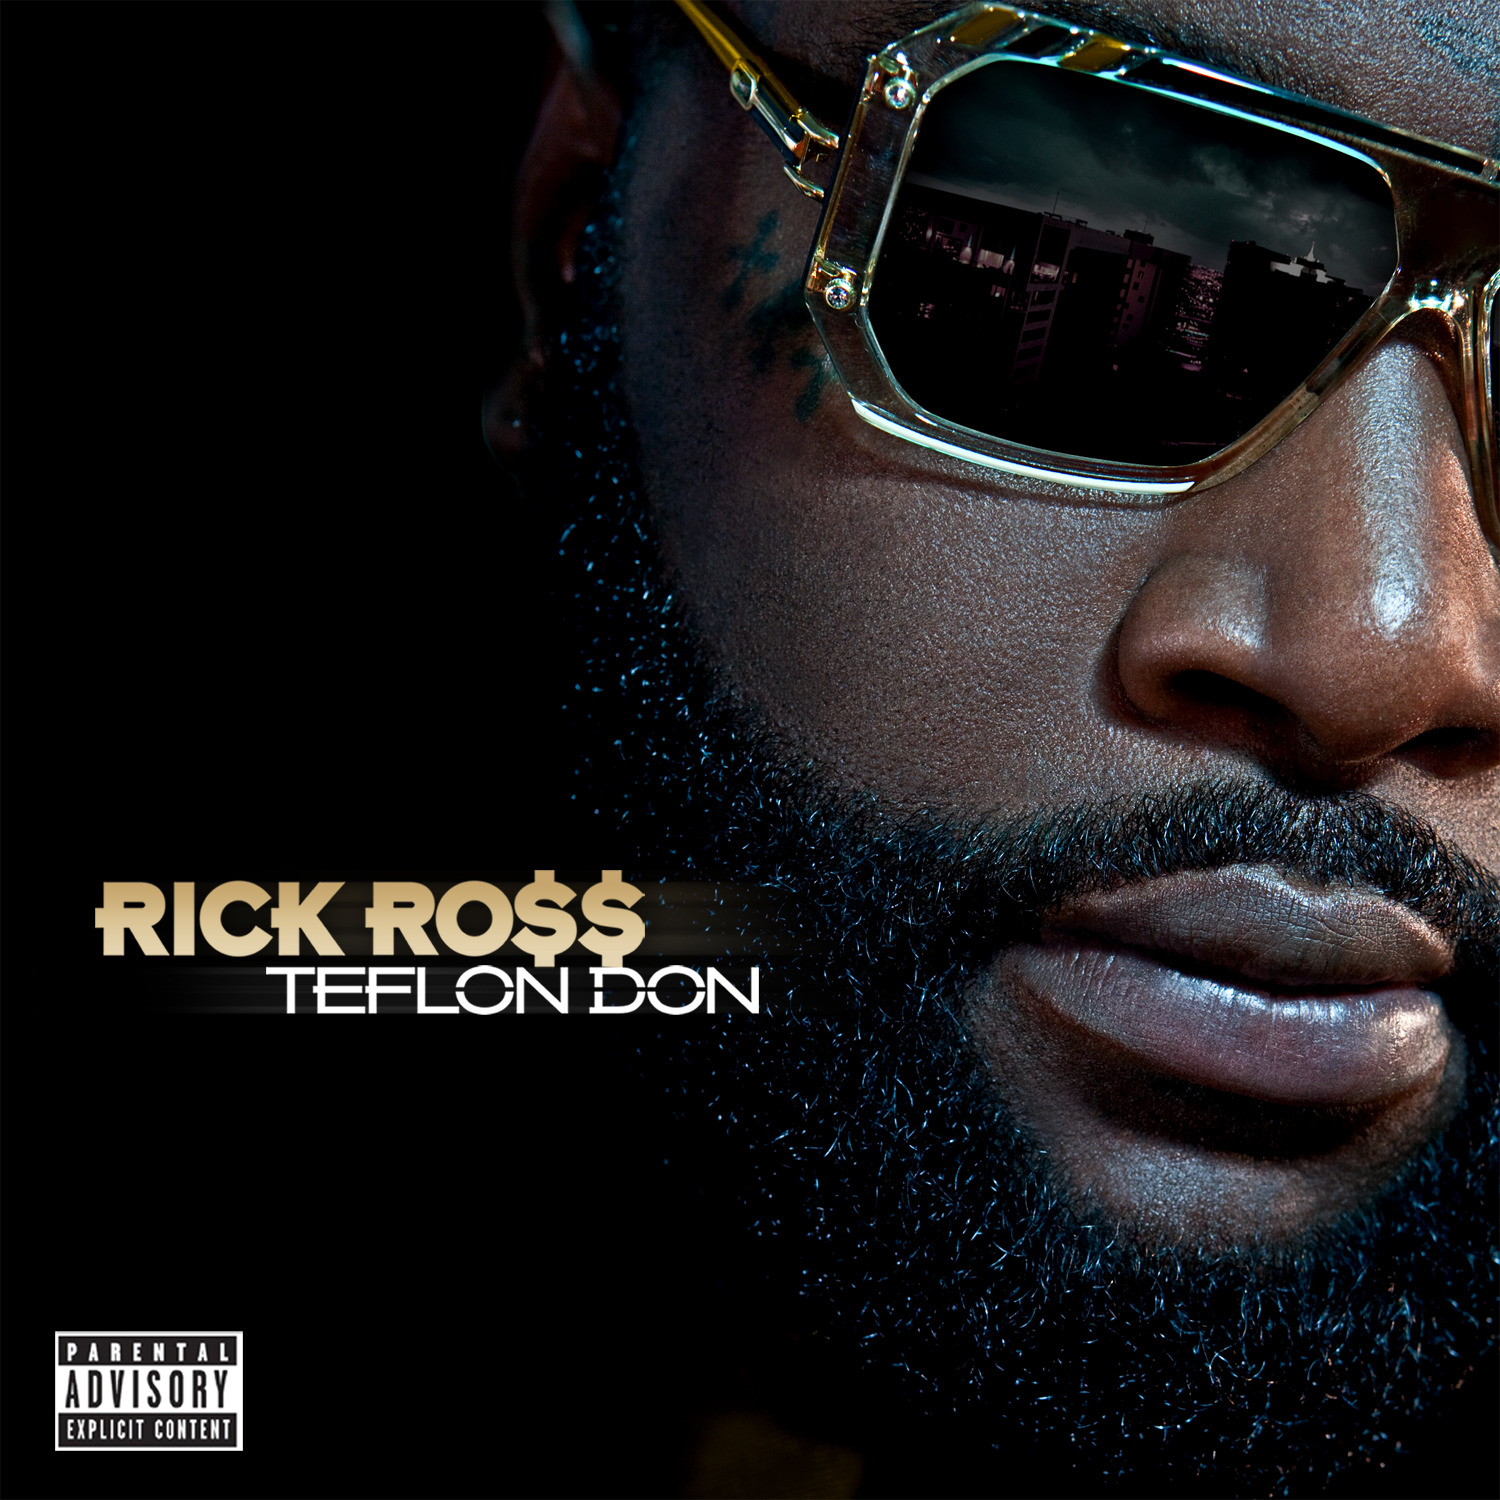 Art for MC Hammer by Rick Ro$$ feat. Gucci Mane